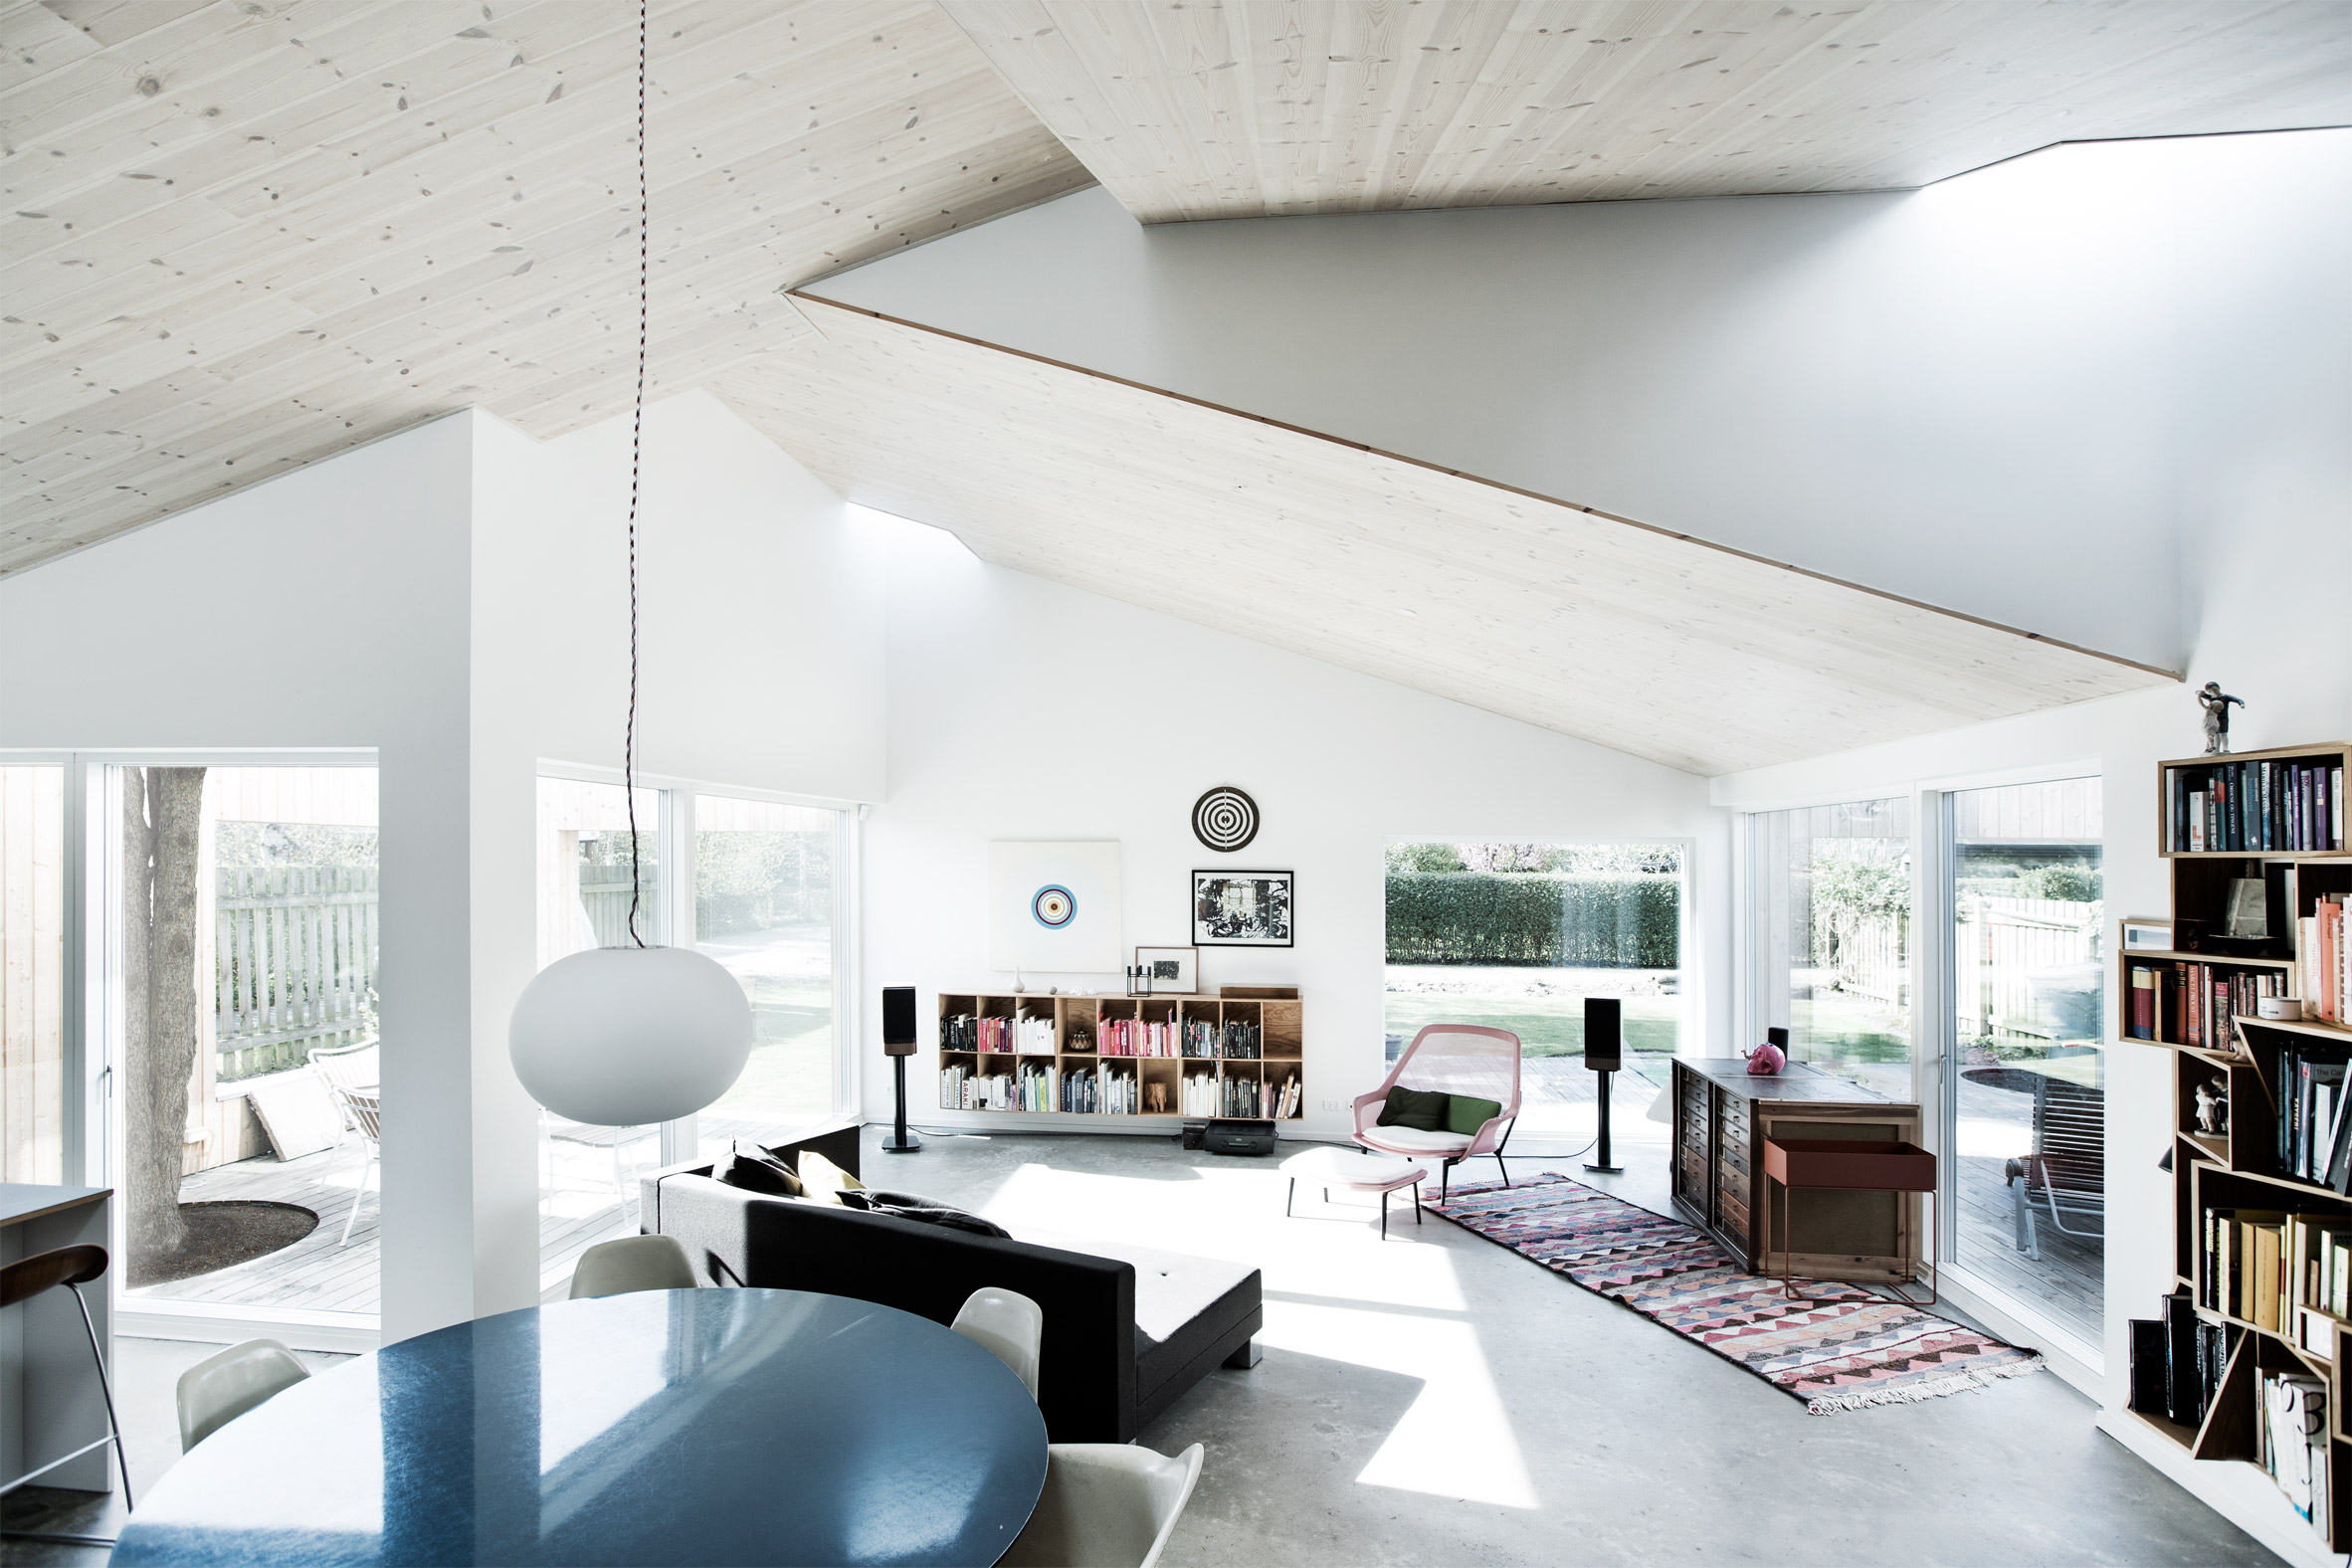 The Roof House by Sigurd Larsen